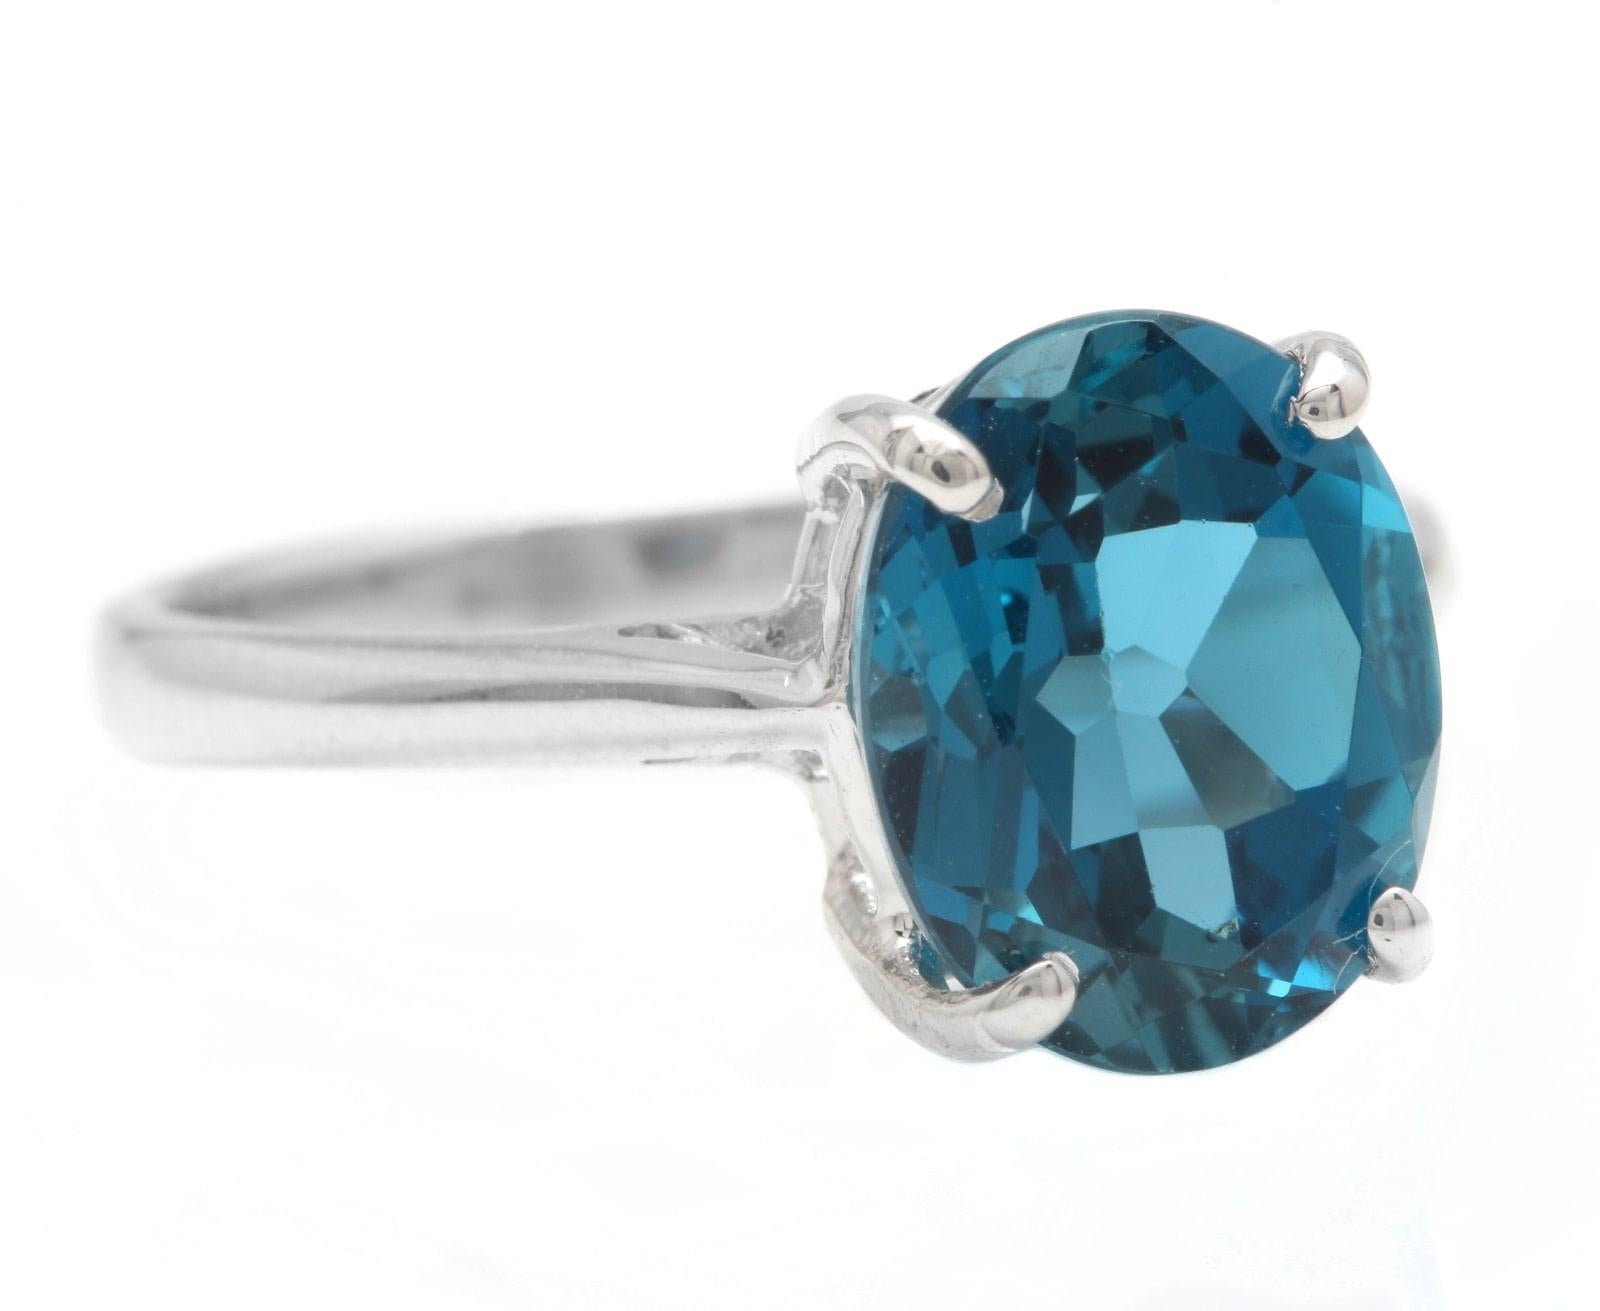 3.50 Carats Natural London Blue Topaz 14K Solid White Gold Ring

Total Natural Round Shaped Topaz Weight is: Approx.  3.50 Carats 

Topaz Measures: Approx. 10.00 x 8.00mm

Ring size: 6 (free re-sizing available)

Ring total weight: Approx. 2.6